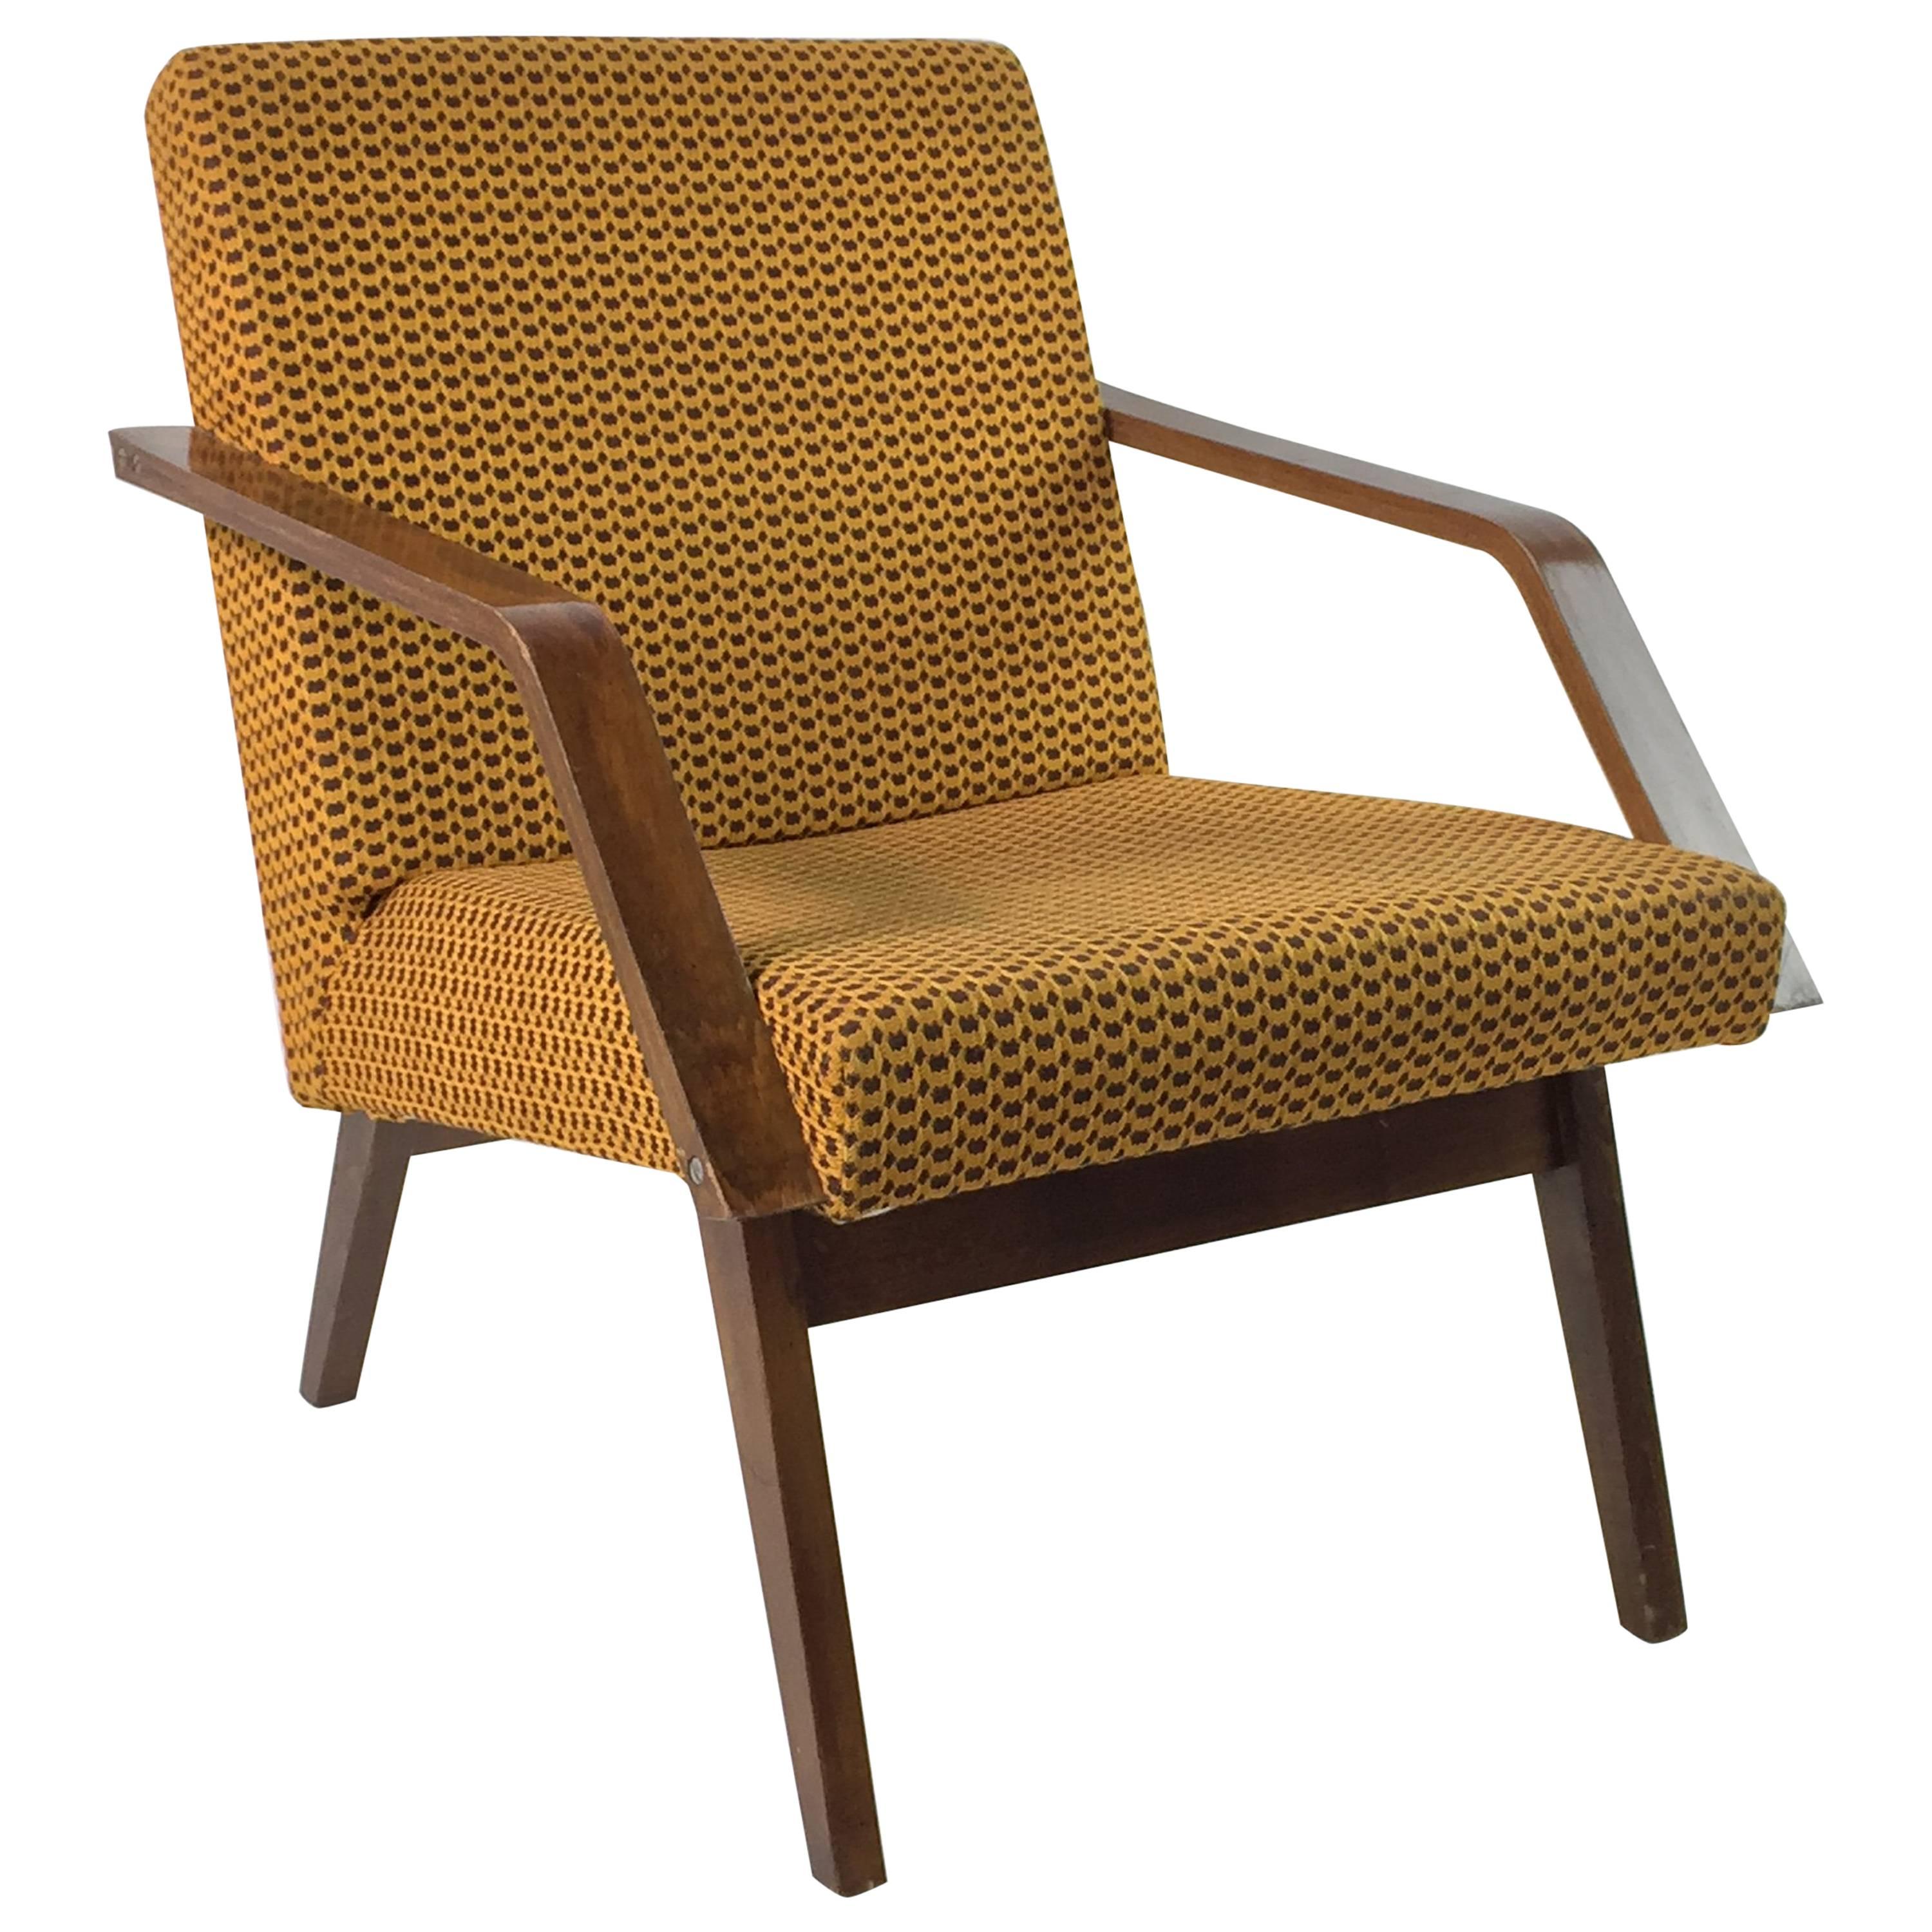 Vintage Safran Colored Lounge Chair For Sale